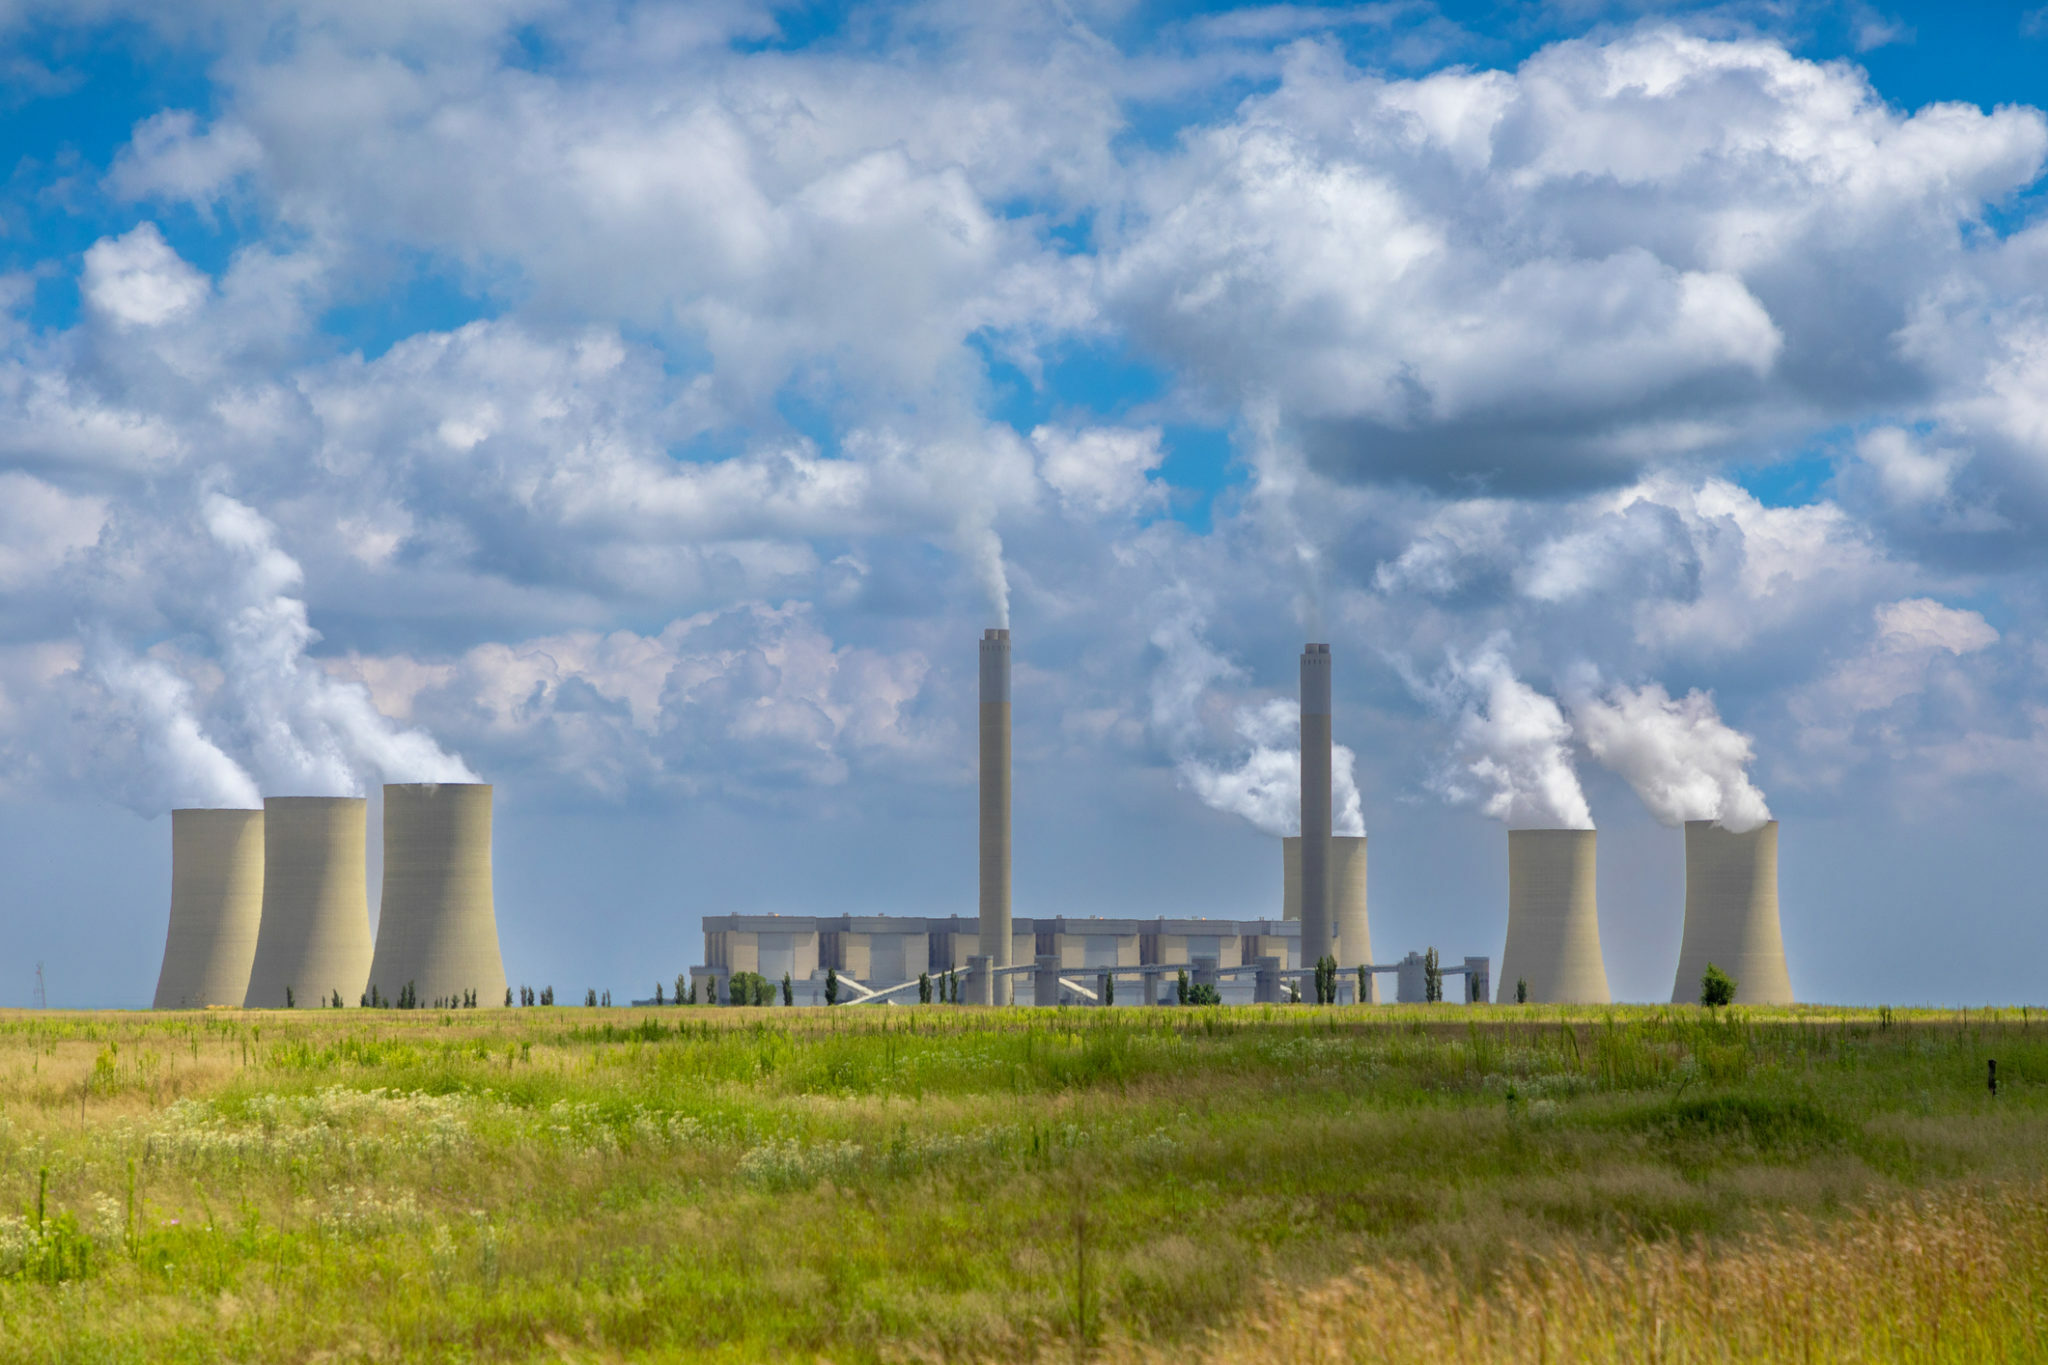 US Inflation Reduction Act Aims To Give Carbon Capture A Boost, But Will It Take Off?